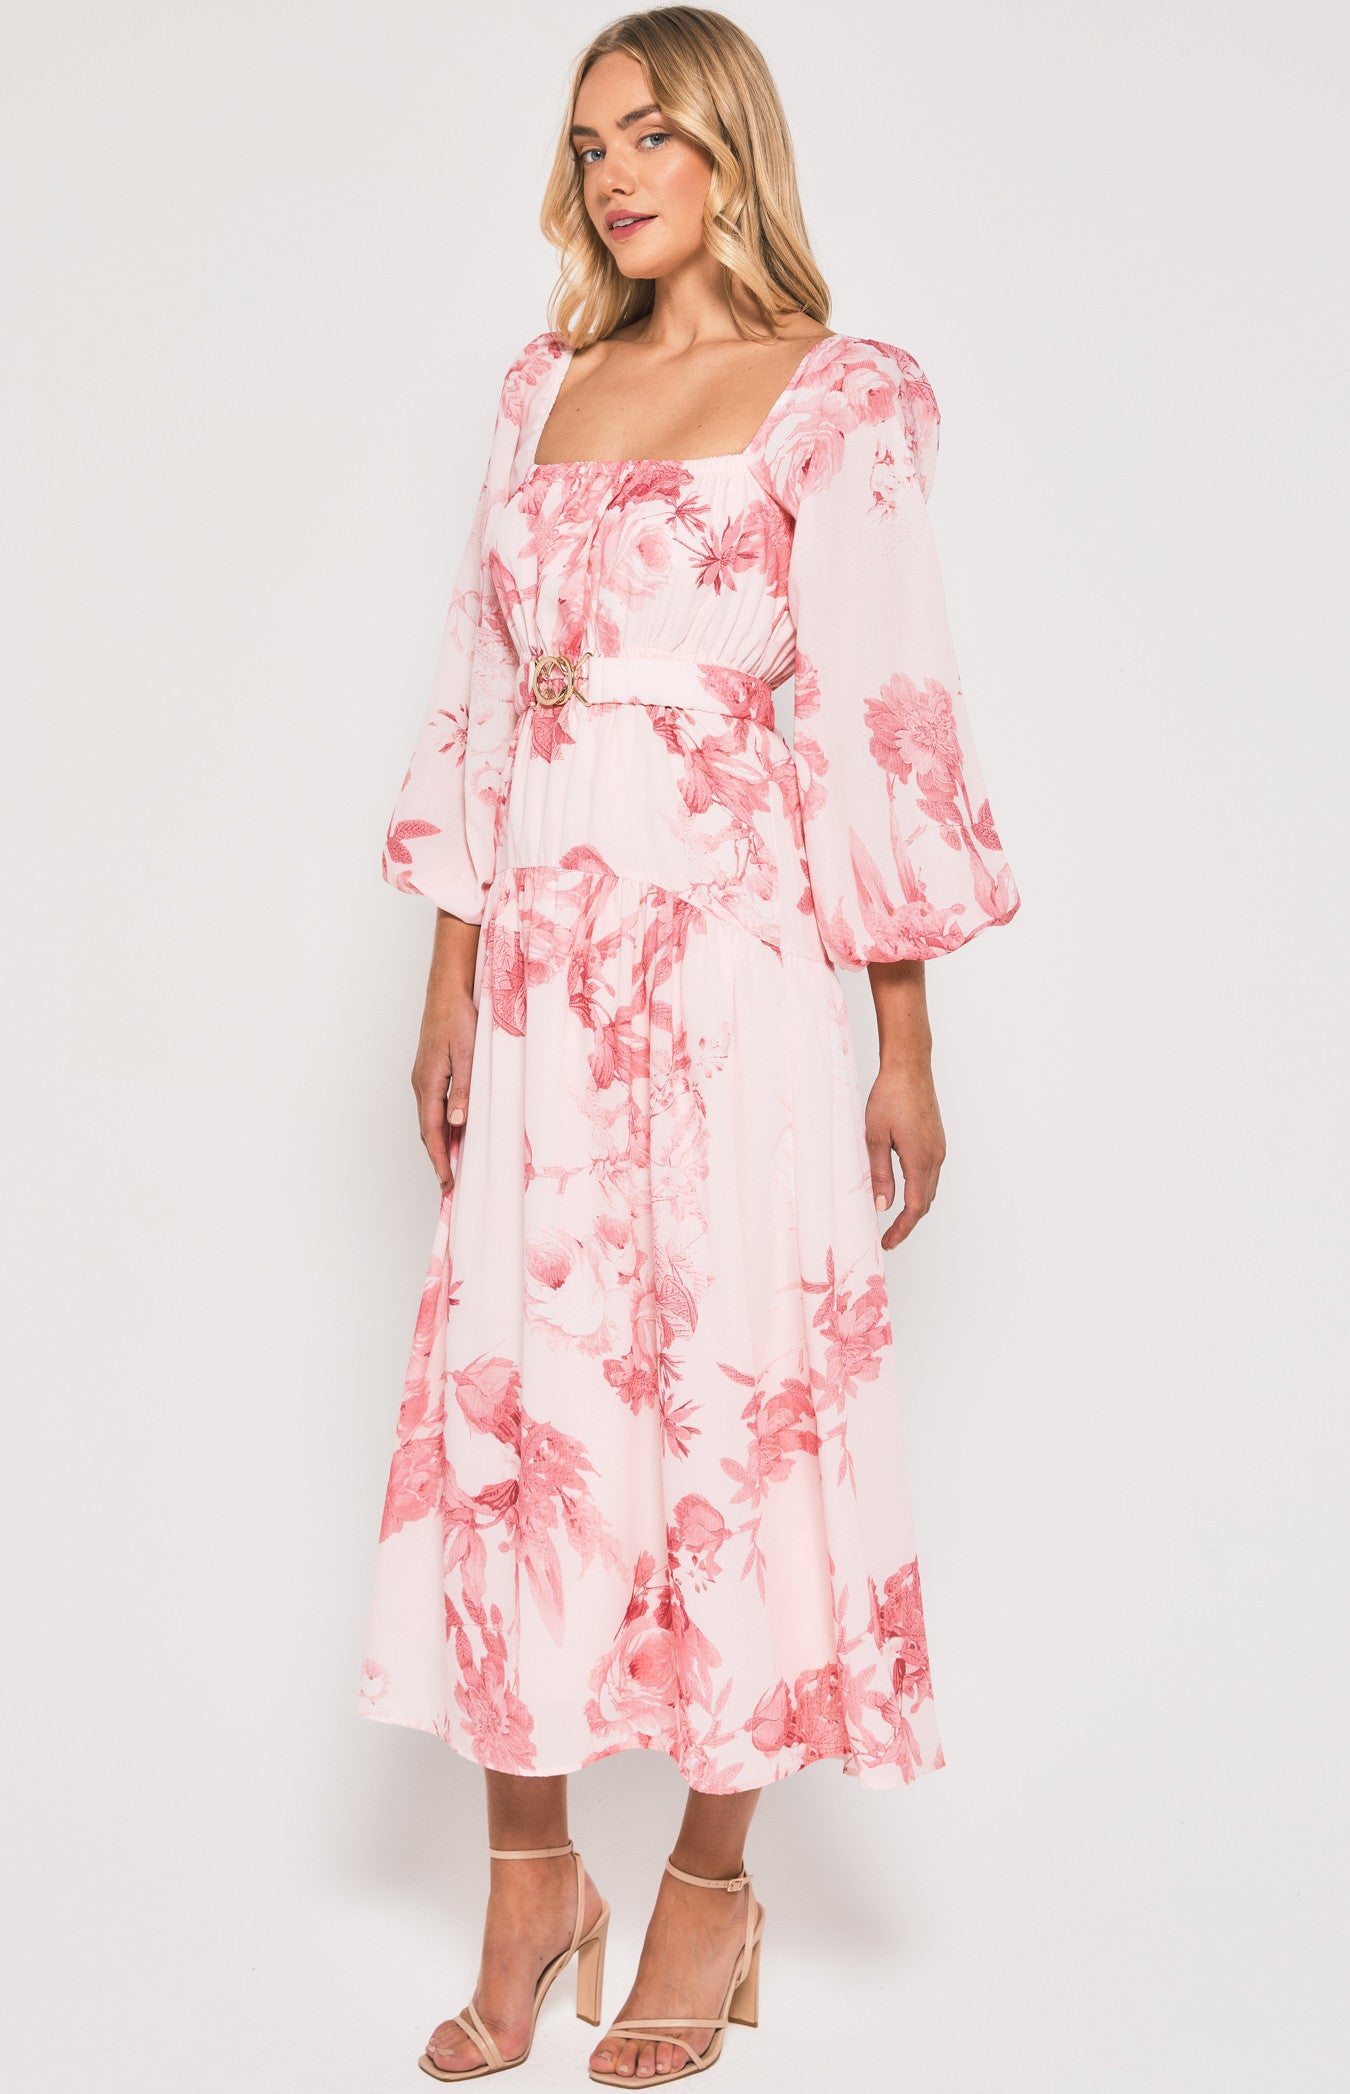 SWEET FLORAL MAXI DRESS WITH METAL CLASP BELT